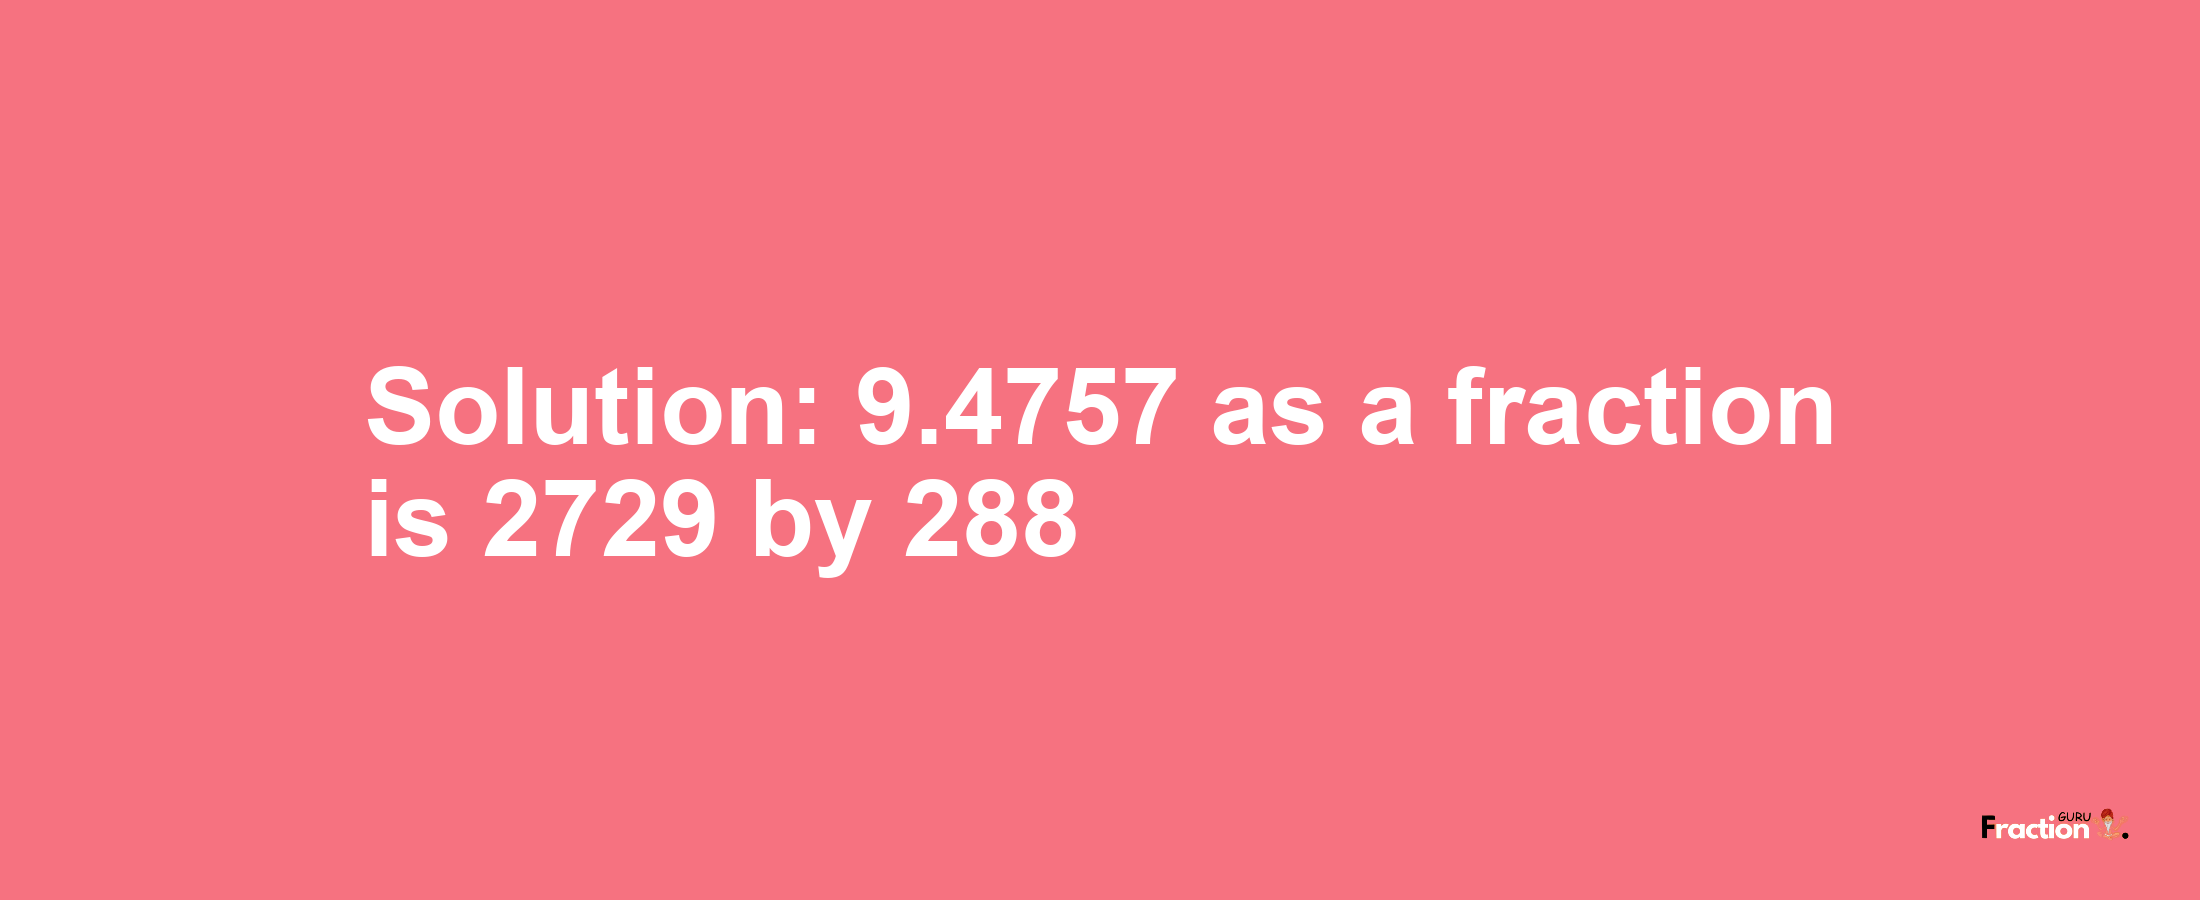 Solution:9.4757 as a fraction is 2729/288